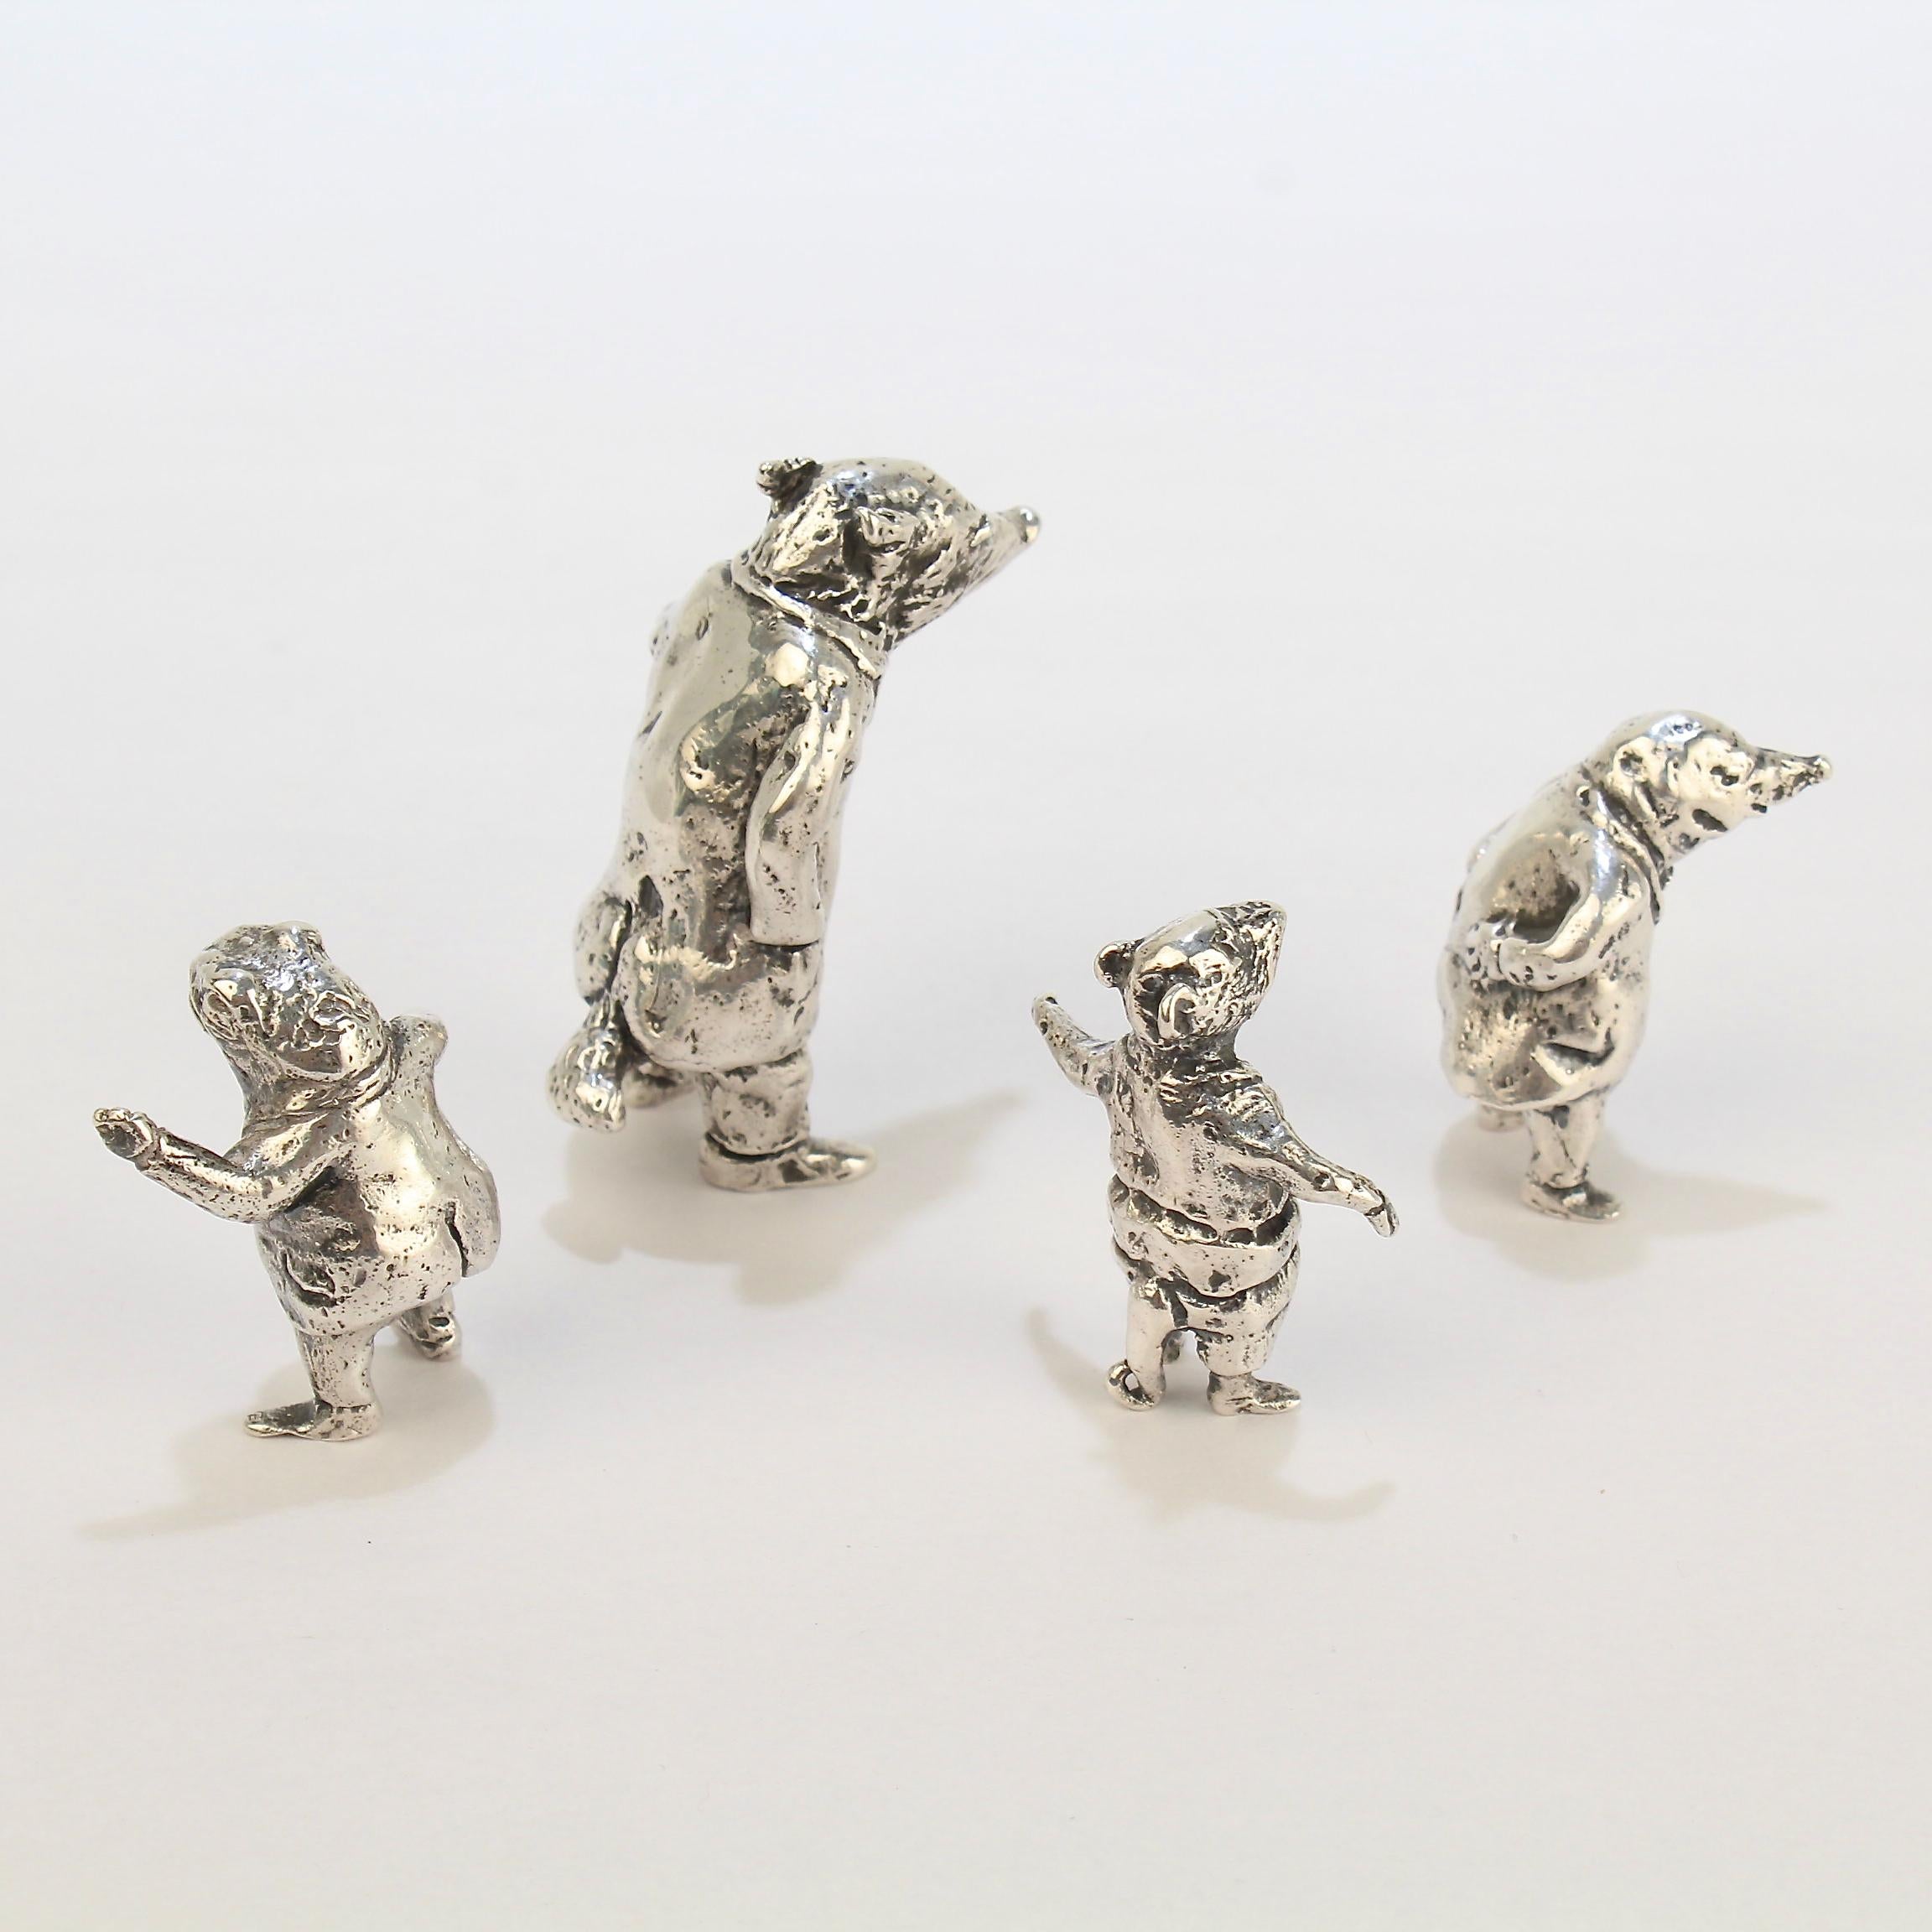 Modern 4 Miniature Sterling Silver Wind in the Willows Figures by Sterling E Lanier